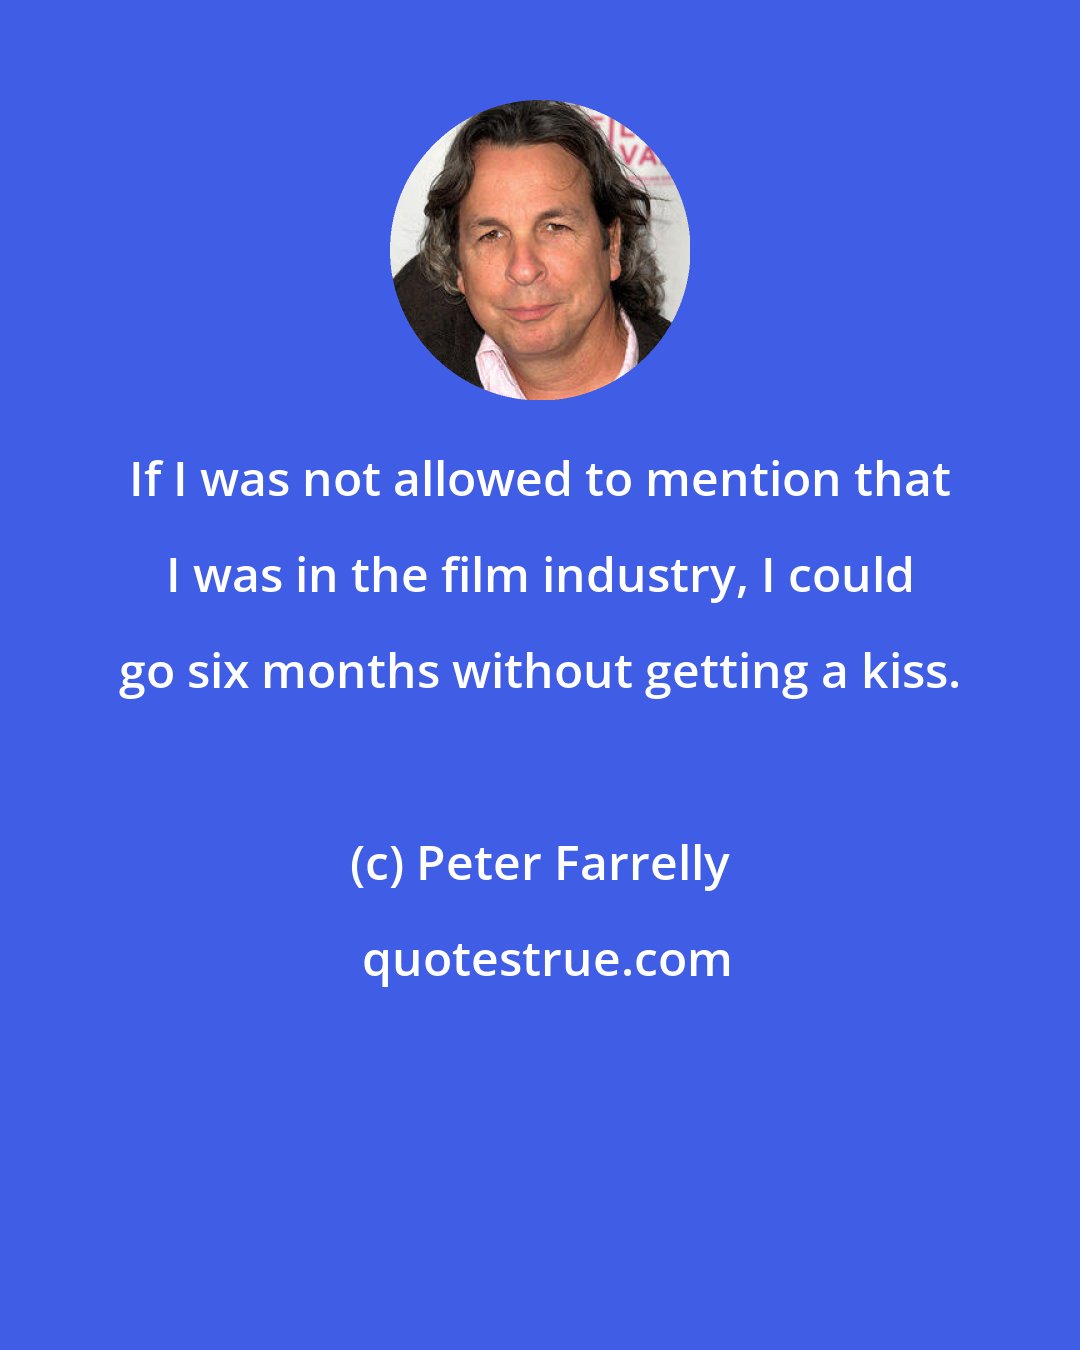 Peter Farrelly: If I was not allowed to mention that I was in the film industry, I could go six months without getting a kiss.